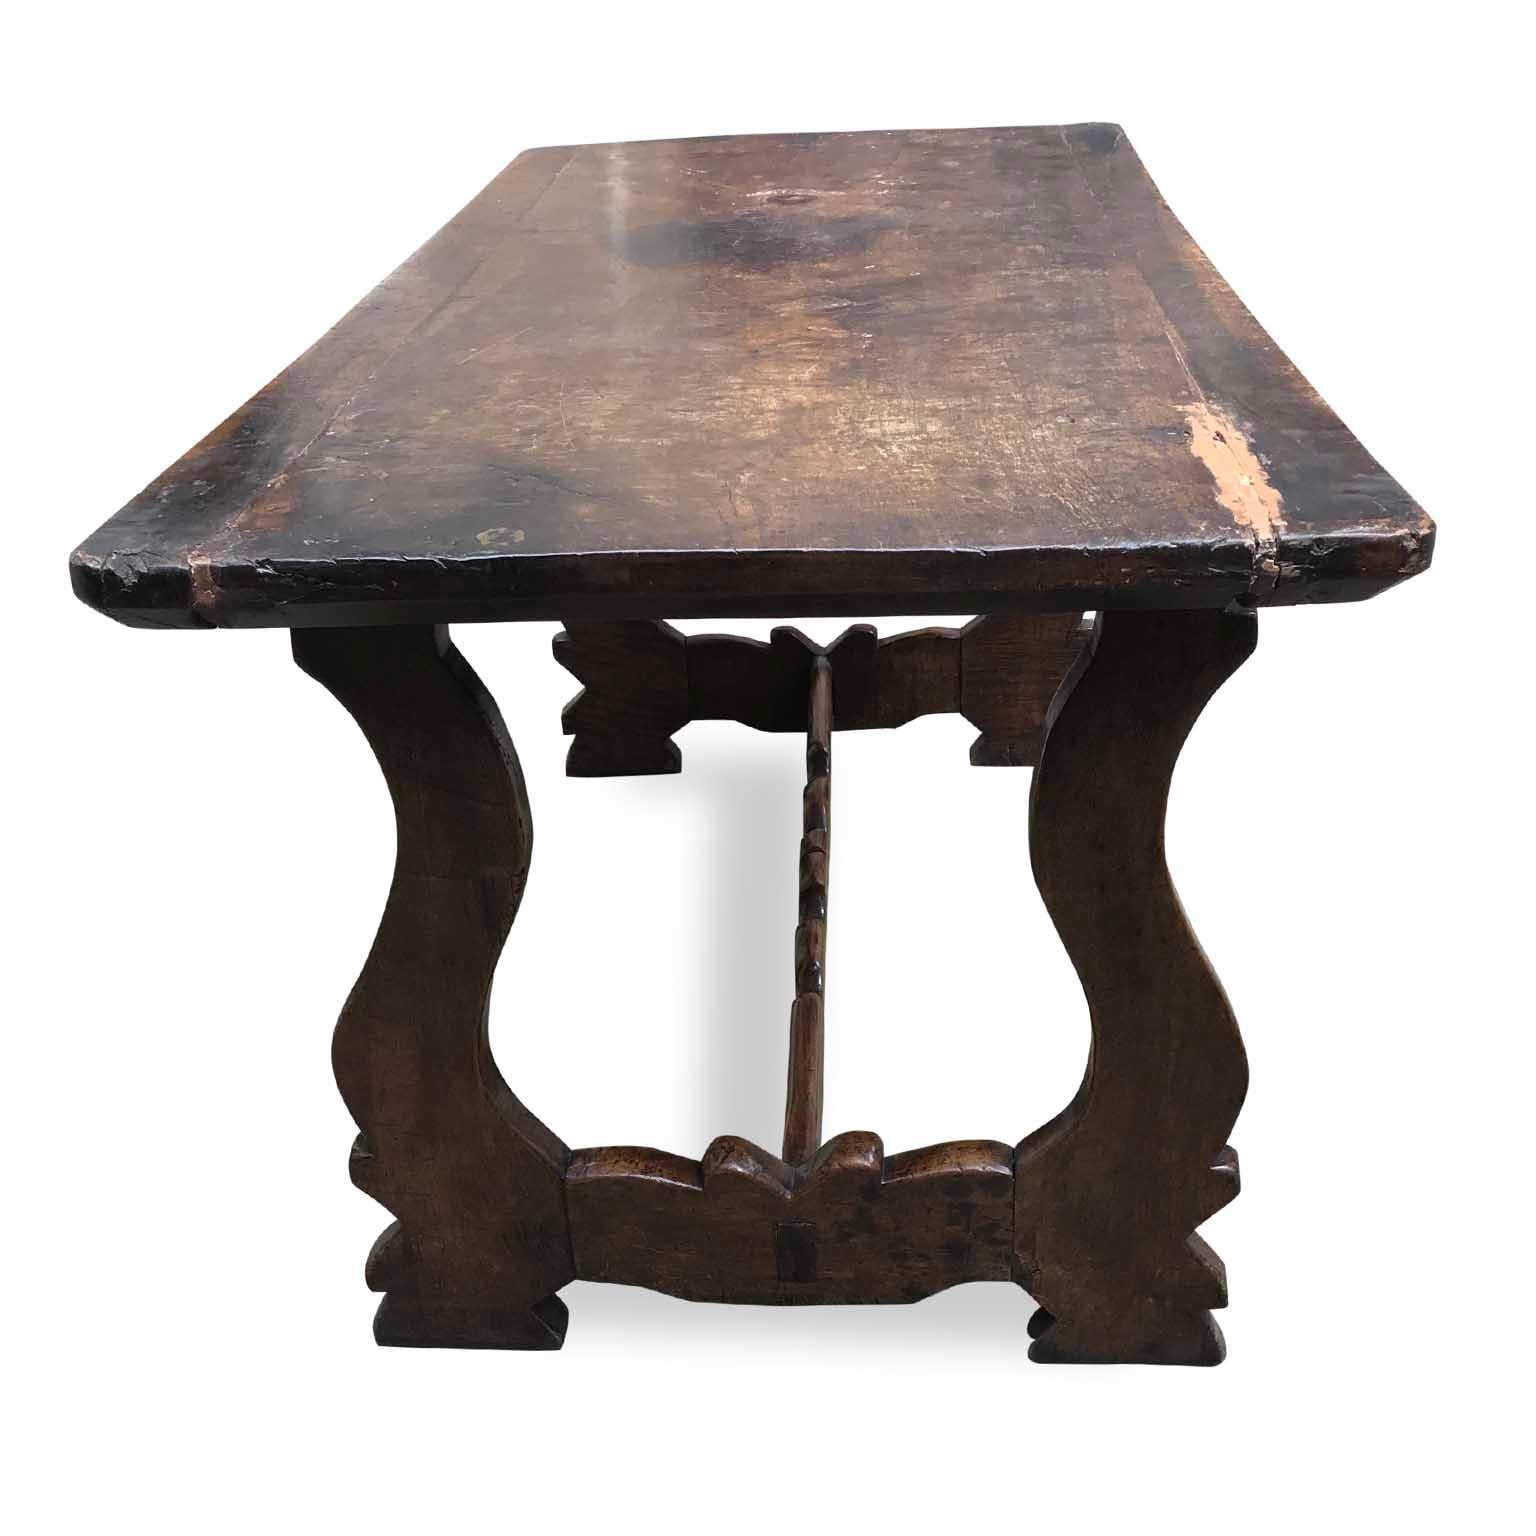 An Italian Renaissance style walnut Fratino table from the 18th century from a private house of Milan. 
Born in Italy during the first half of 18th century, this exquisite solid walnut table features a rectangular top, realized with a single solid